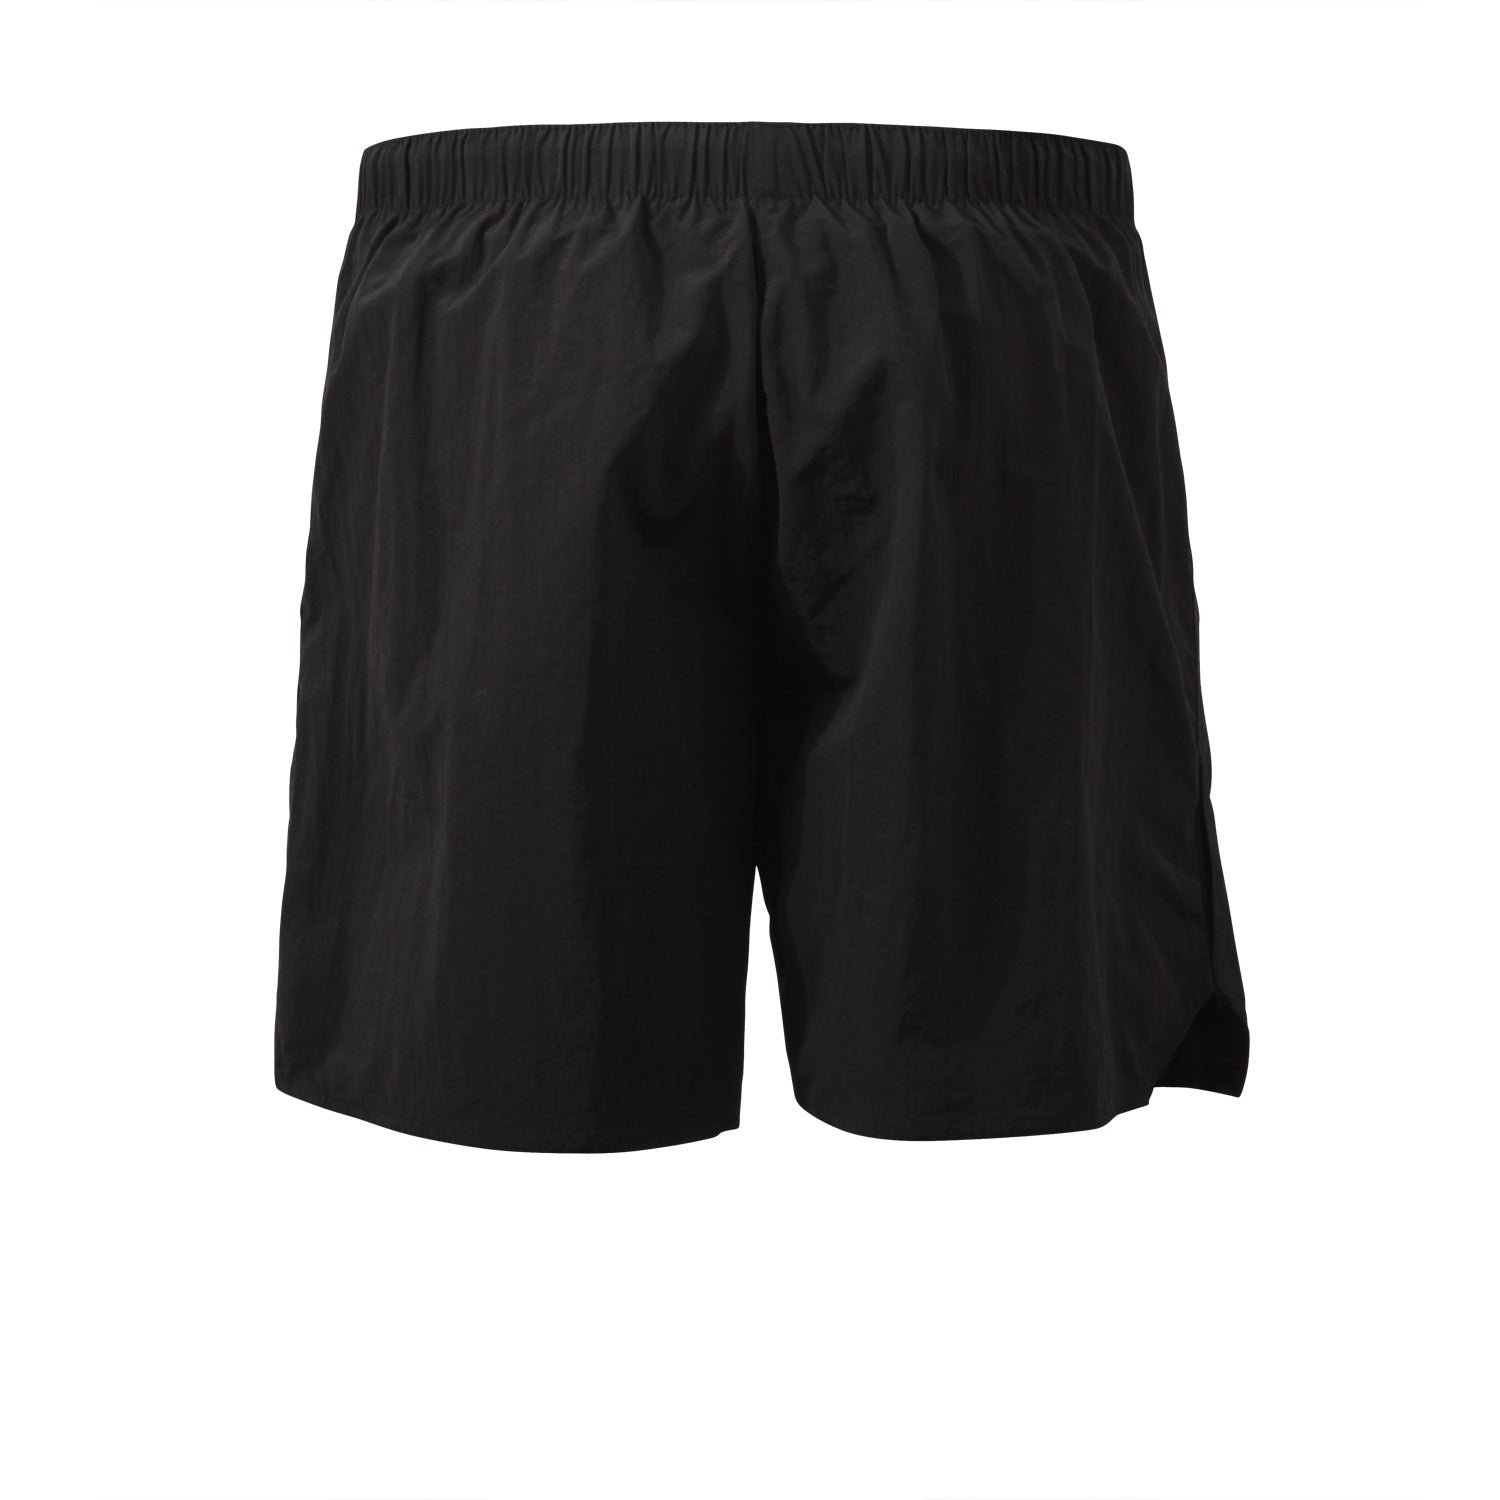 Designed for the most arduous workouts, Rothco's Army PT shorts feature lightweight quick-dry fabric and anti-microbial treated interior. 